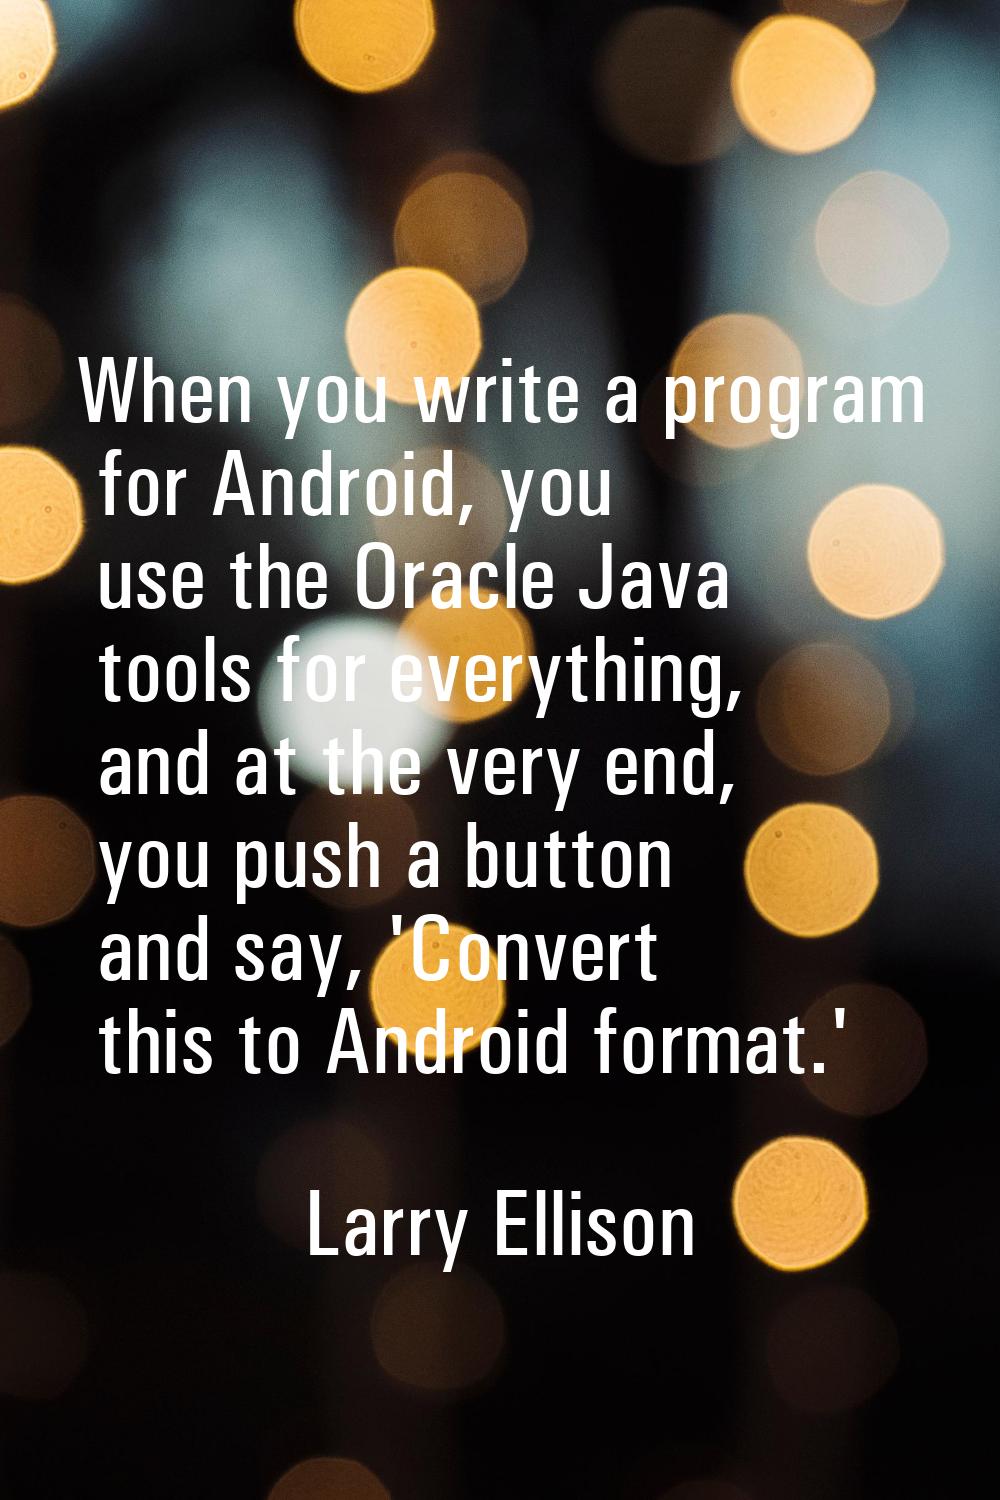 When you write a program for Android, you use the Oracle Java tools for everything, and at the very